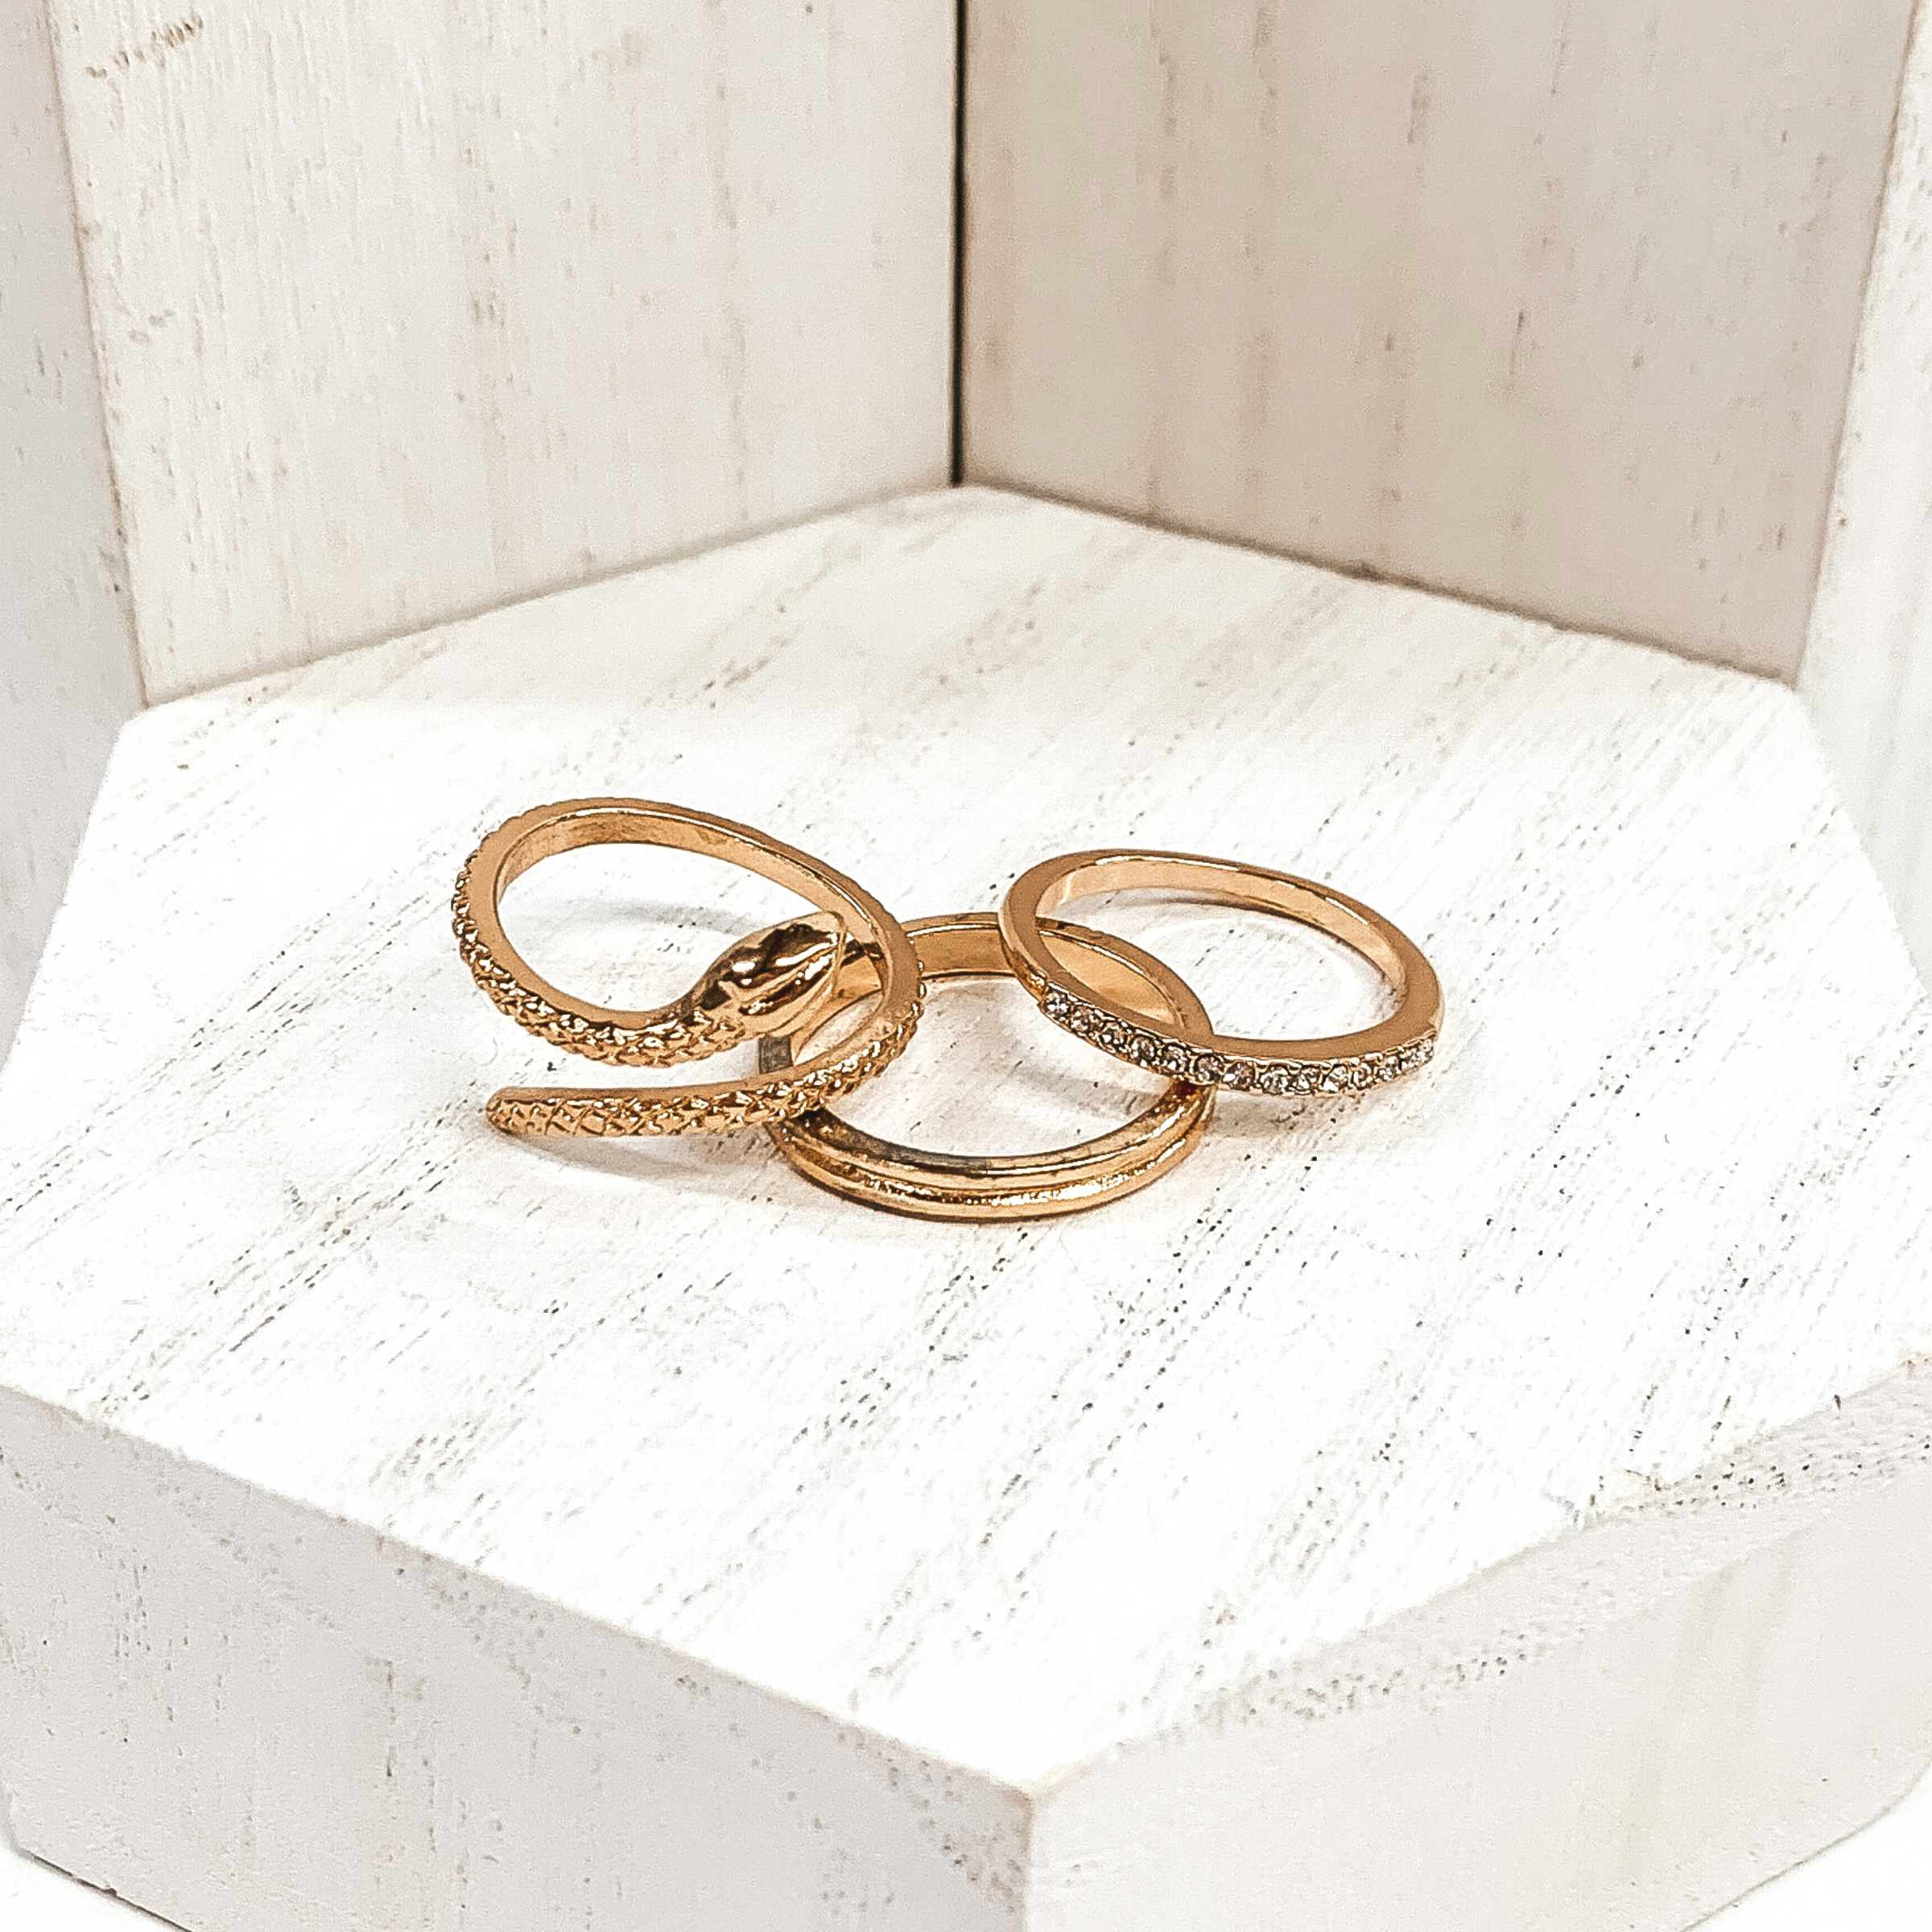 This gold ring set is very edgy. It includes one snake ring, one double layered ring, and one ring with a row of crystals. These rings are pictured on a white background.